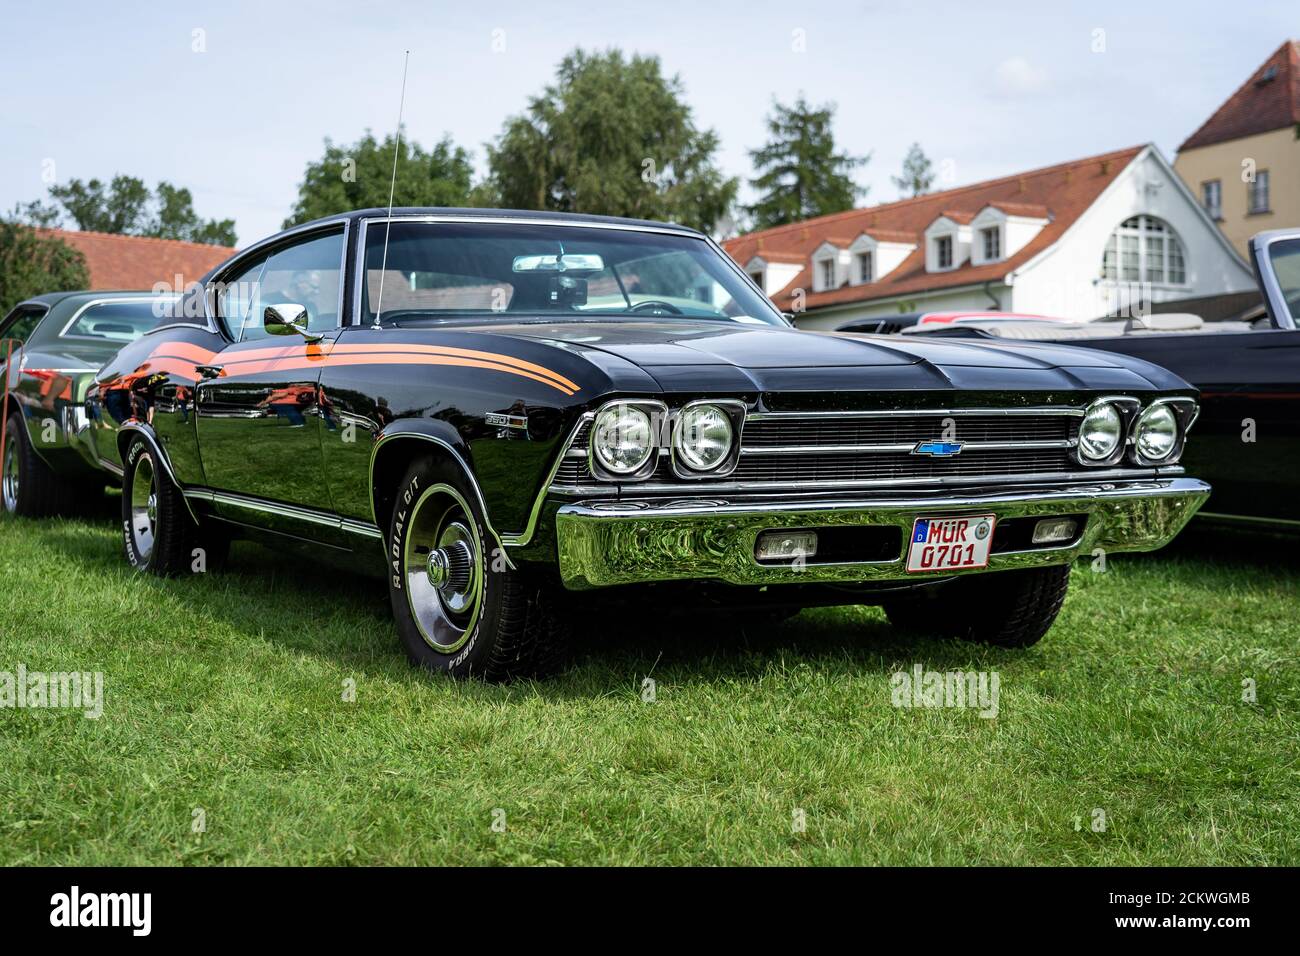 DIEDERSDORF, GERMANY - AUGUST 30, 2020: The mid-size car Chevrolet Chevelle, 1969. The exhibition of 'US Car Classics'. Stock Photo